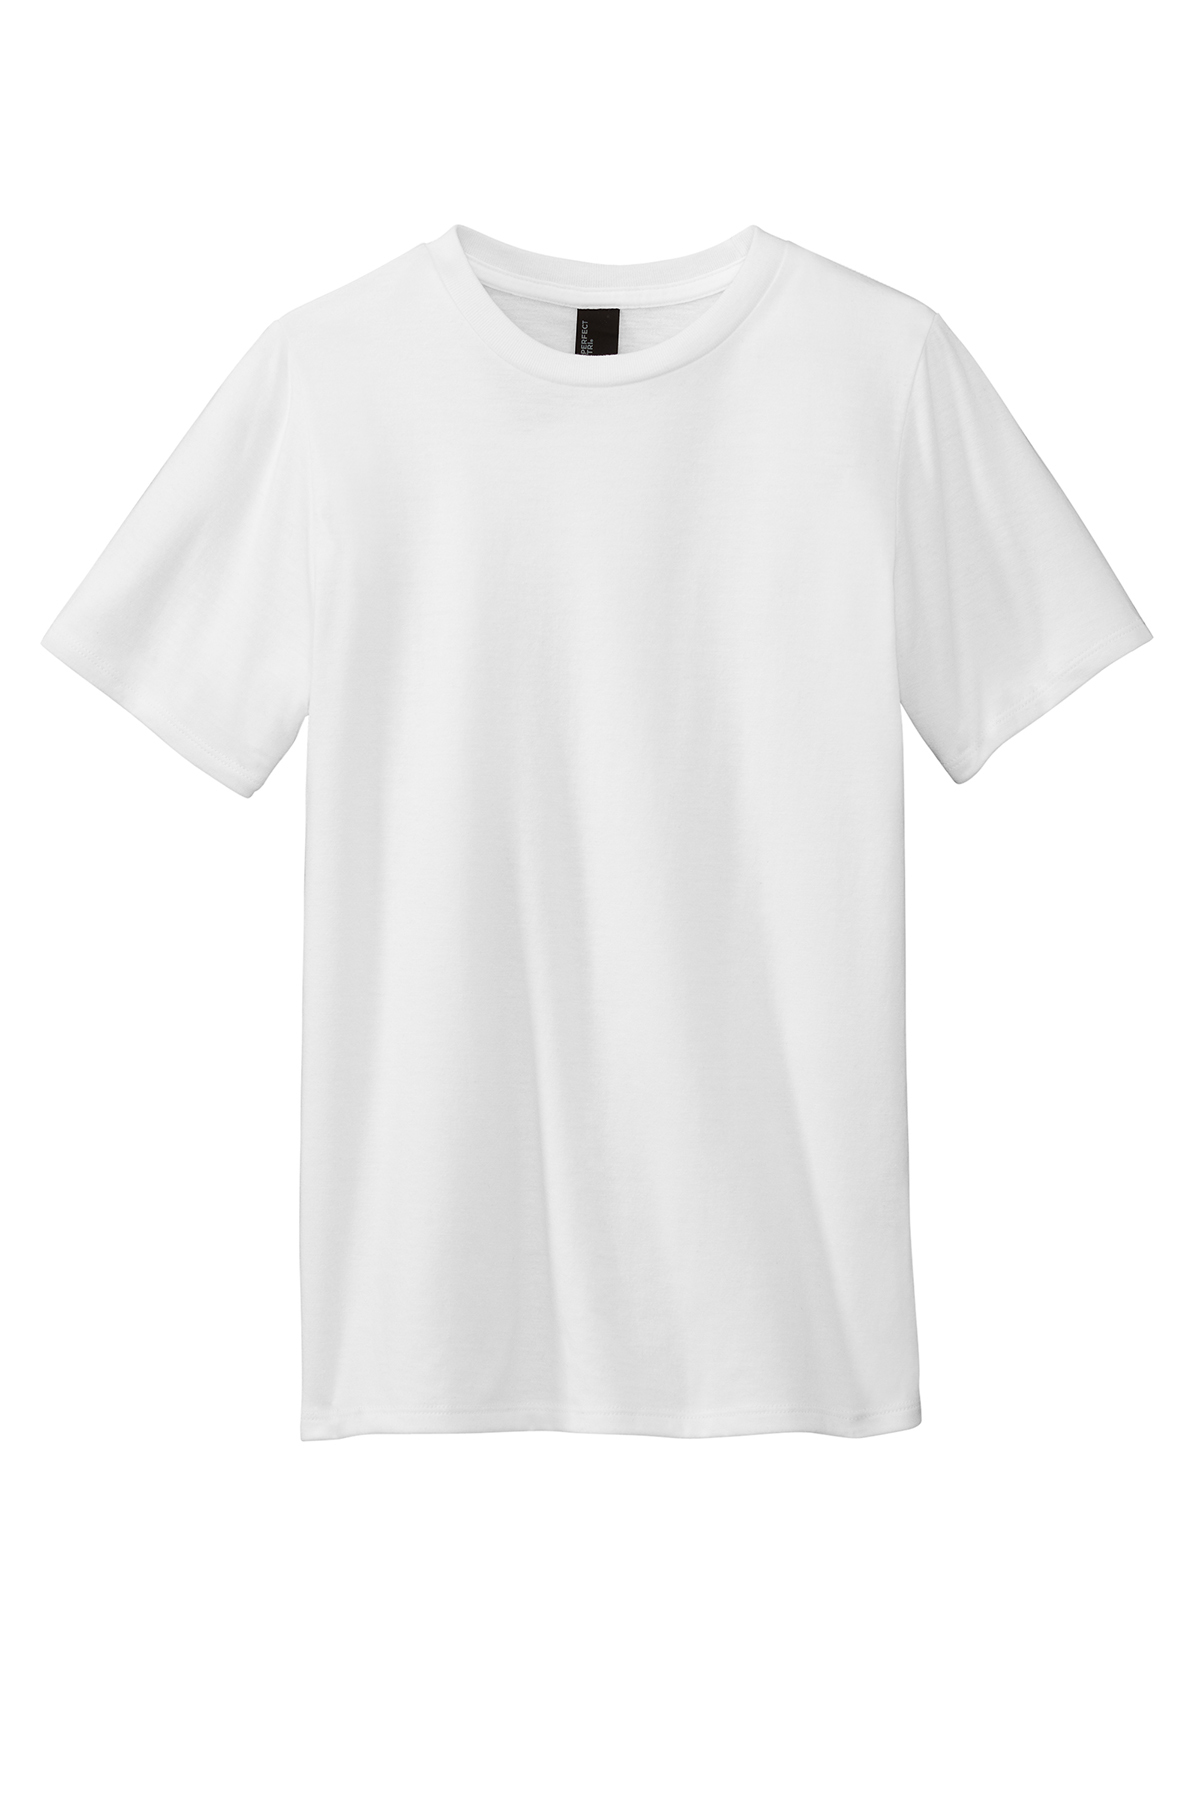 District Youth Perfect Tri Tee | Product | SanMar